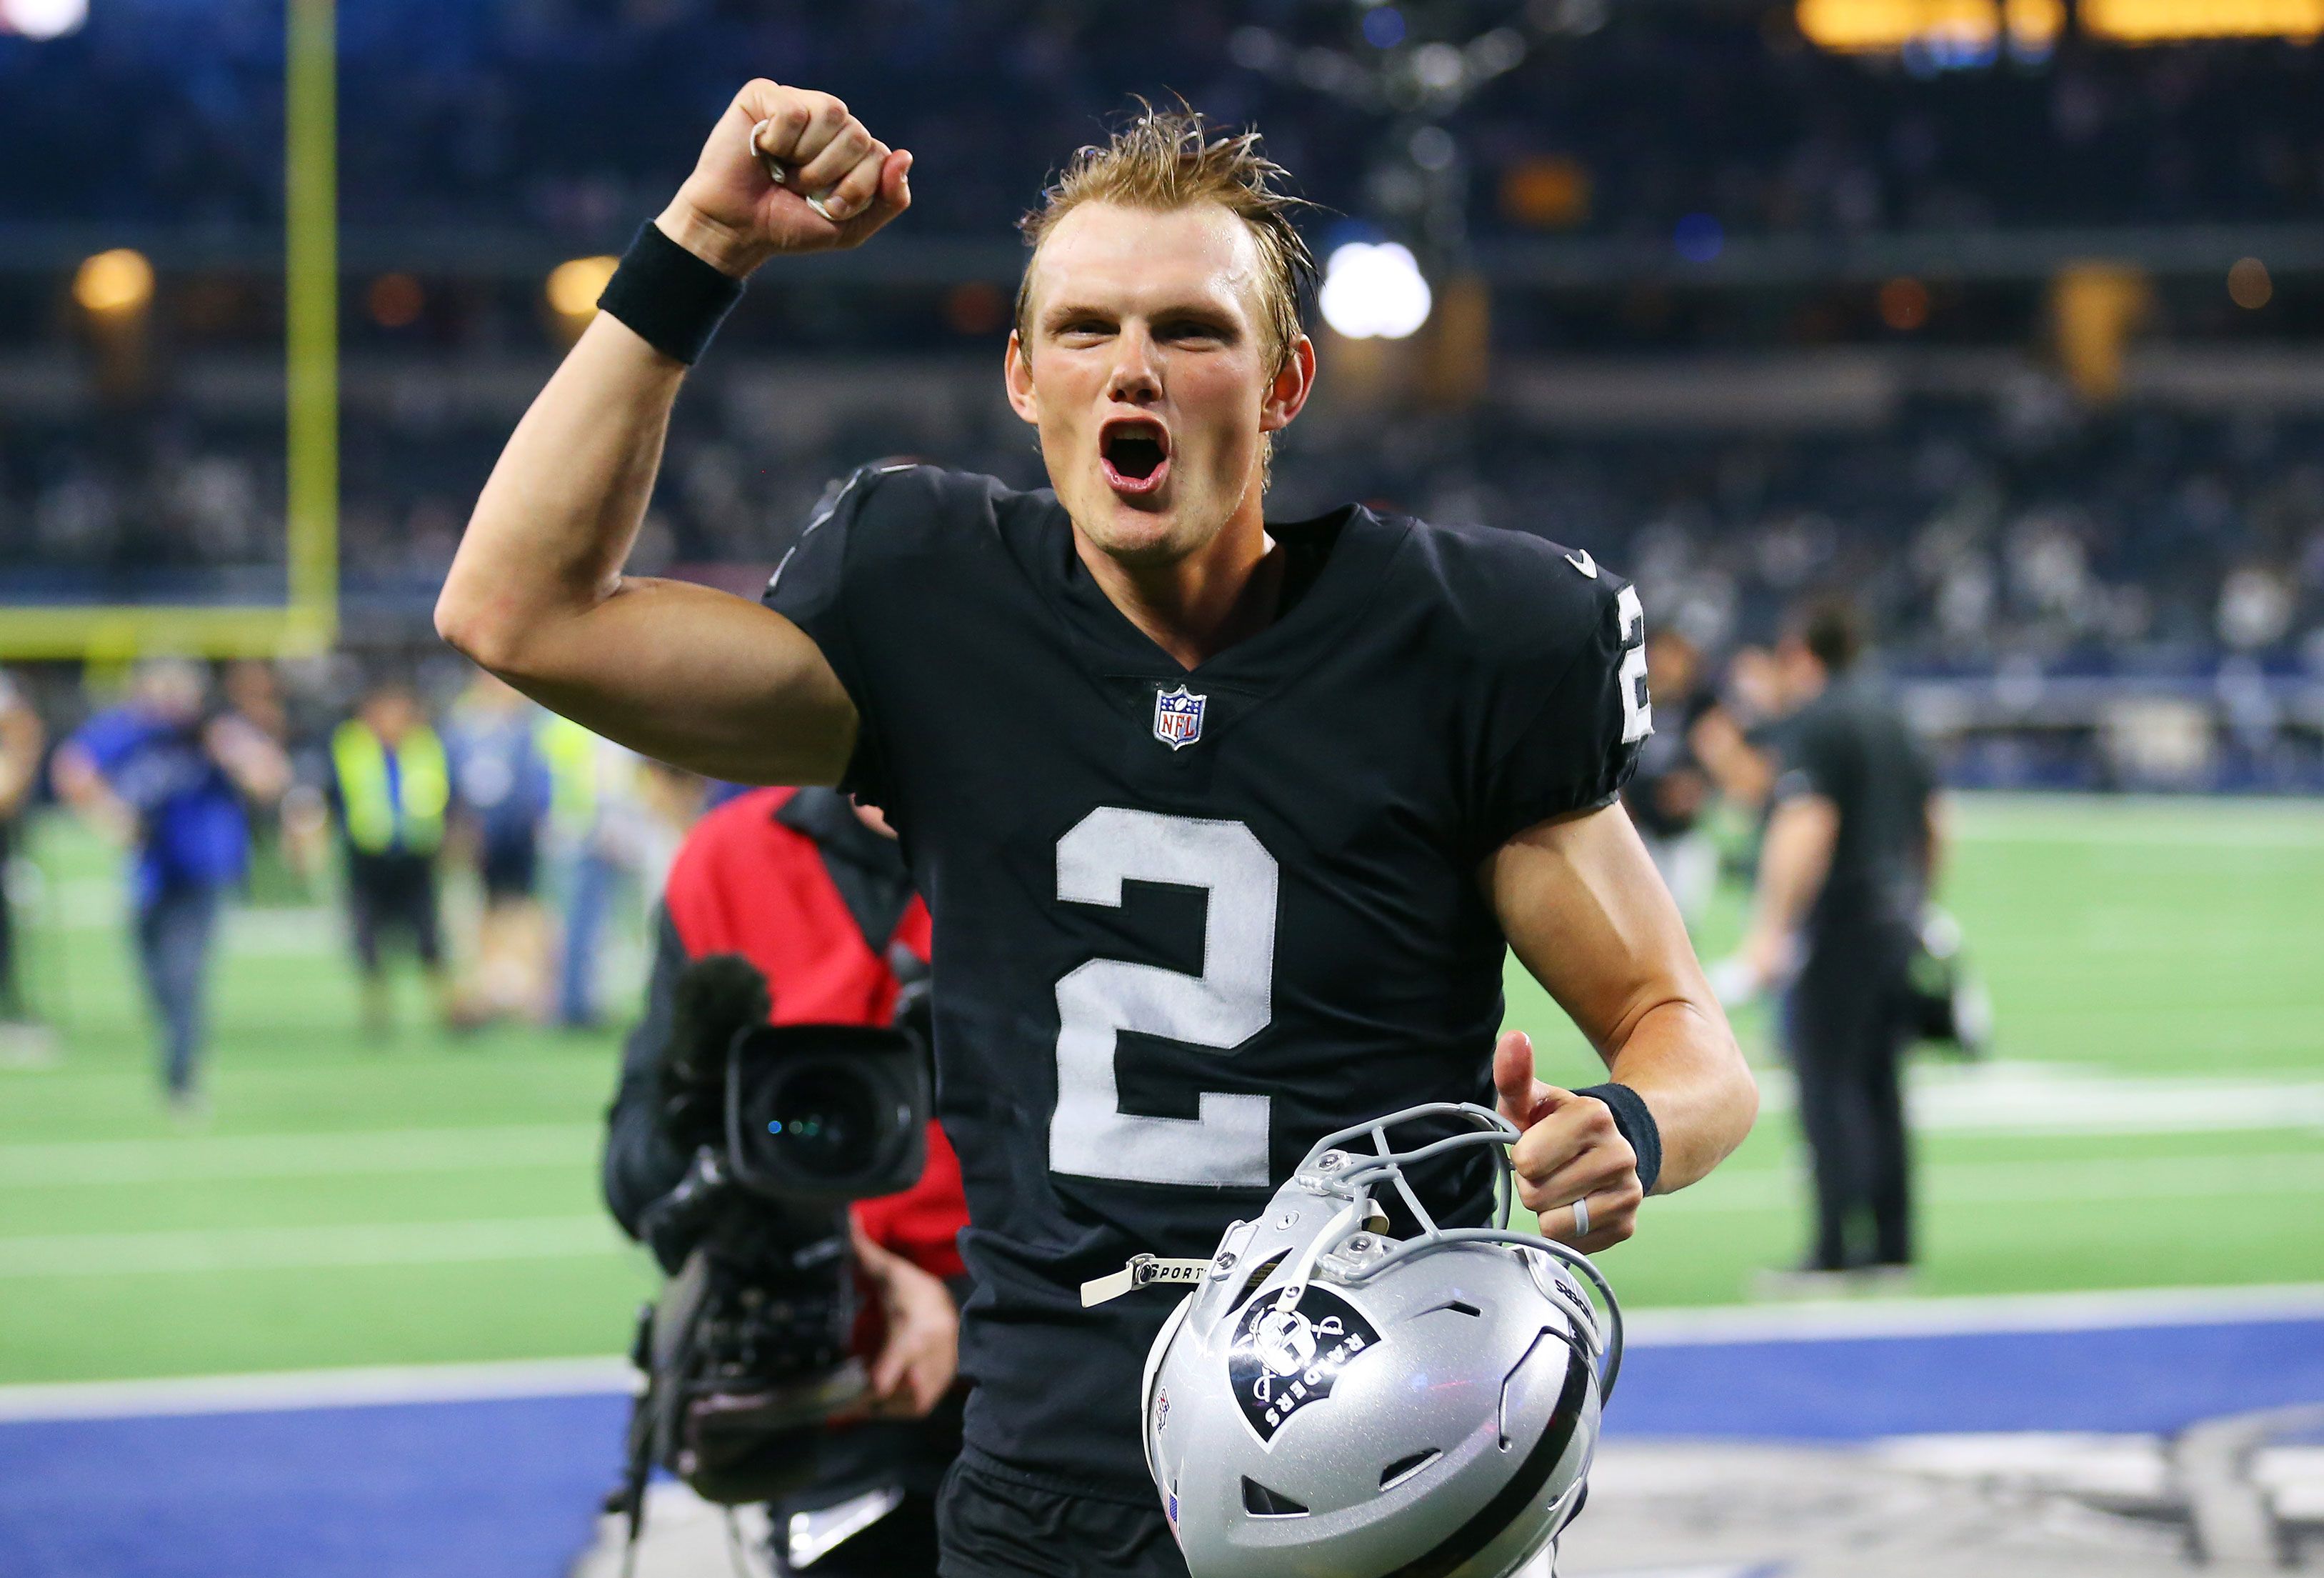 What Time Does Raiders Cowboys Thanksgiving Football Start, End?